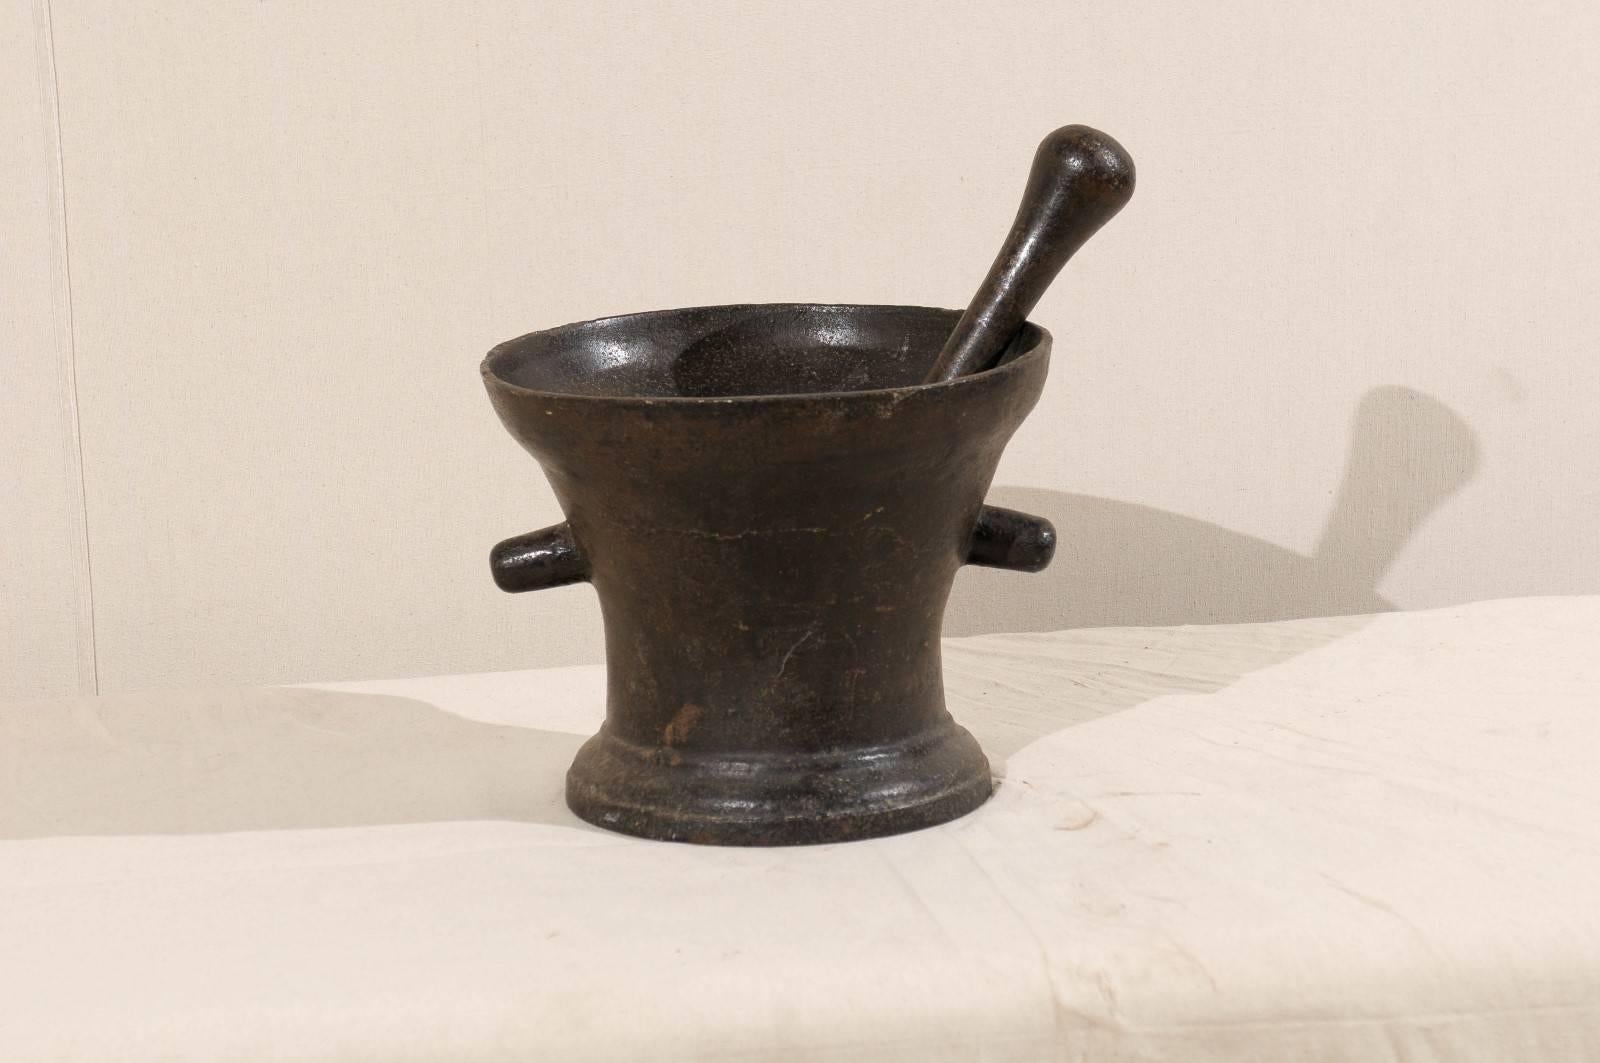 An Italian, 18th century mortar and pestle. This iron mortar and pestle has a nice heavy weight and patina and features two handles.